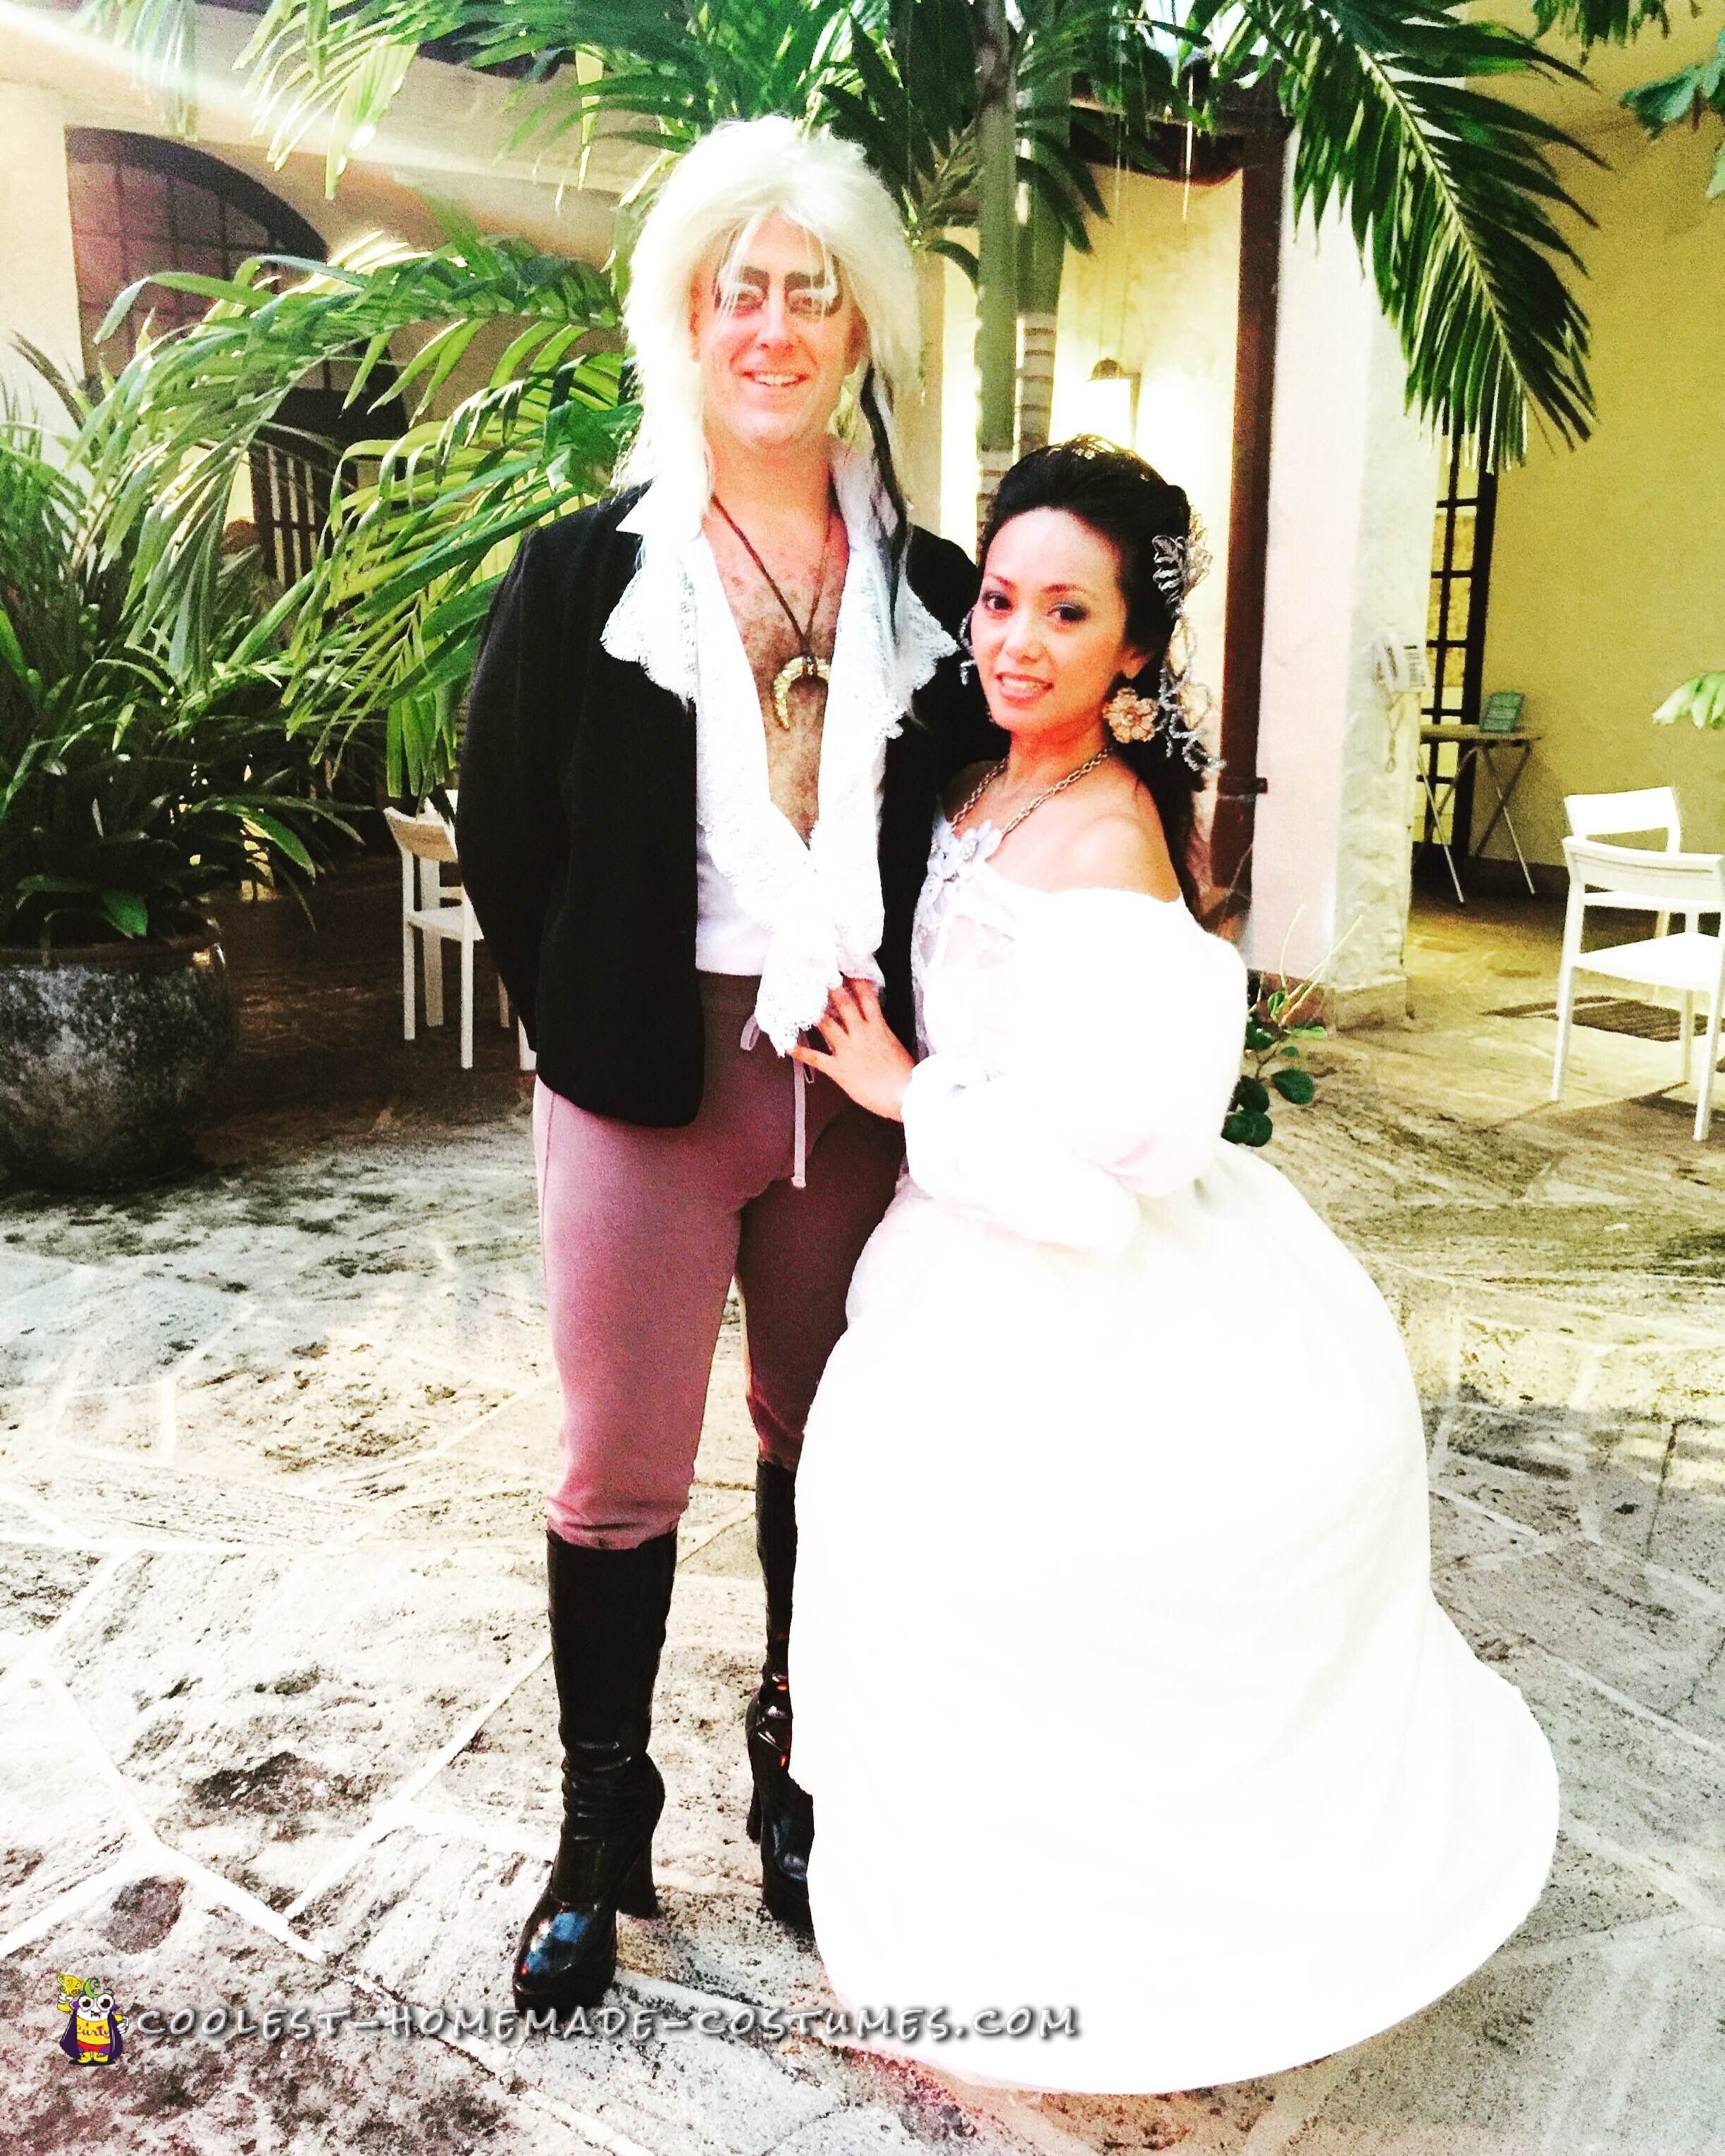 Jareth the Goblin King and Sarah from Labyrinth Couple Costume